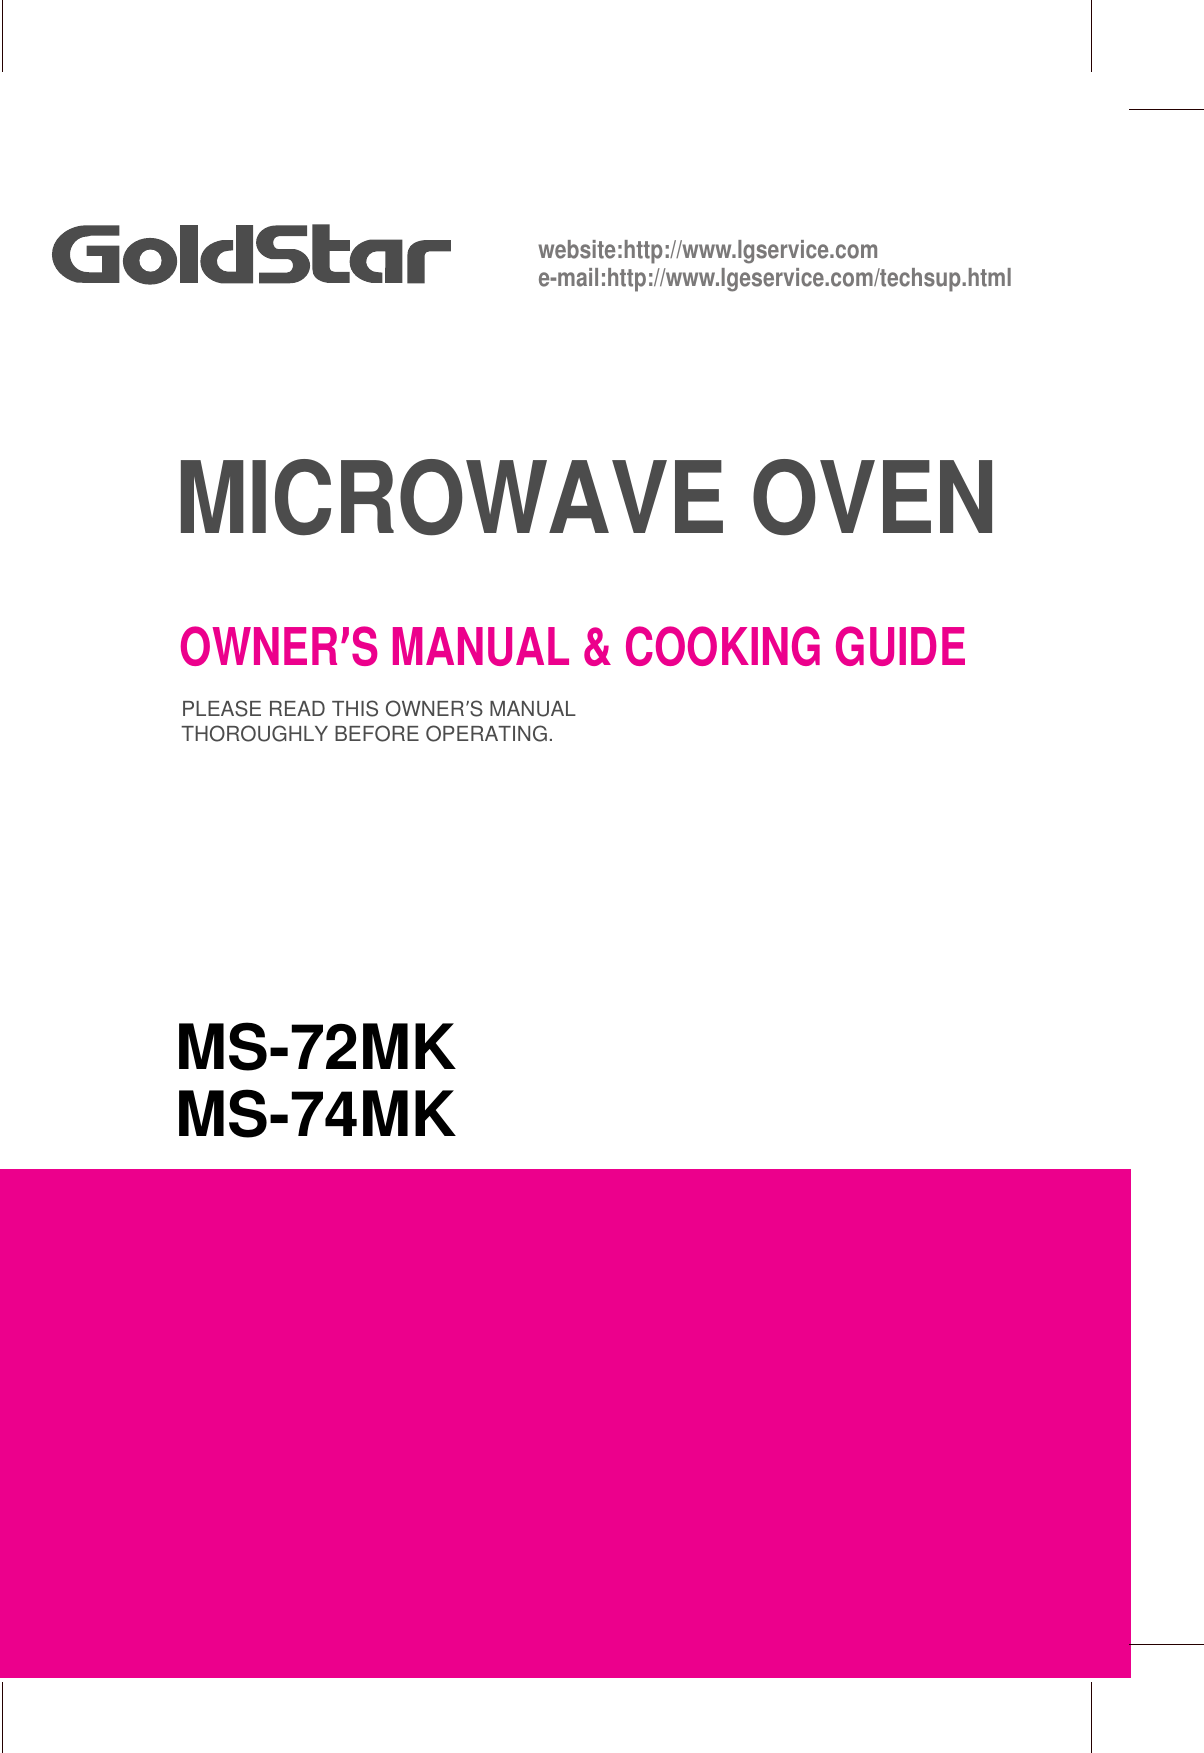 MICROWAVE OVENOWNER’S MANUAL &amp; COOKING GUIDEPLEASE READ THIS OWNER’S MANUALTHOROUGHLY BEFORE OPERATING.MS-72MKMS-74MKwebsite:http://www.lgservice.come-mail:http://www.lgeservice.com/techsup.html